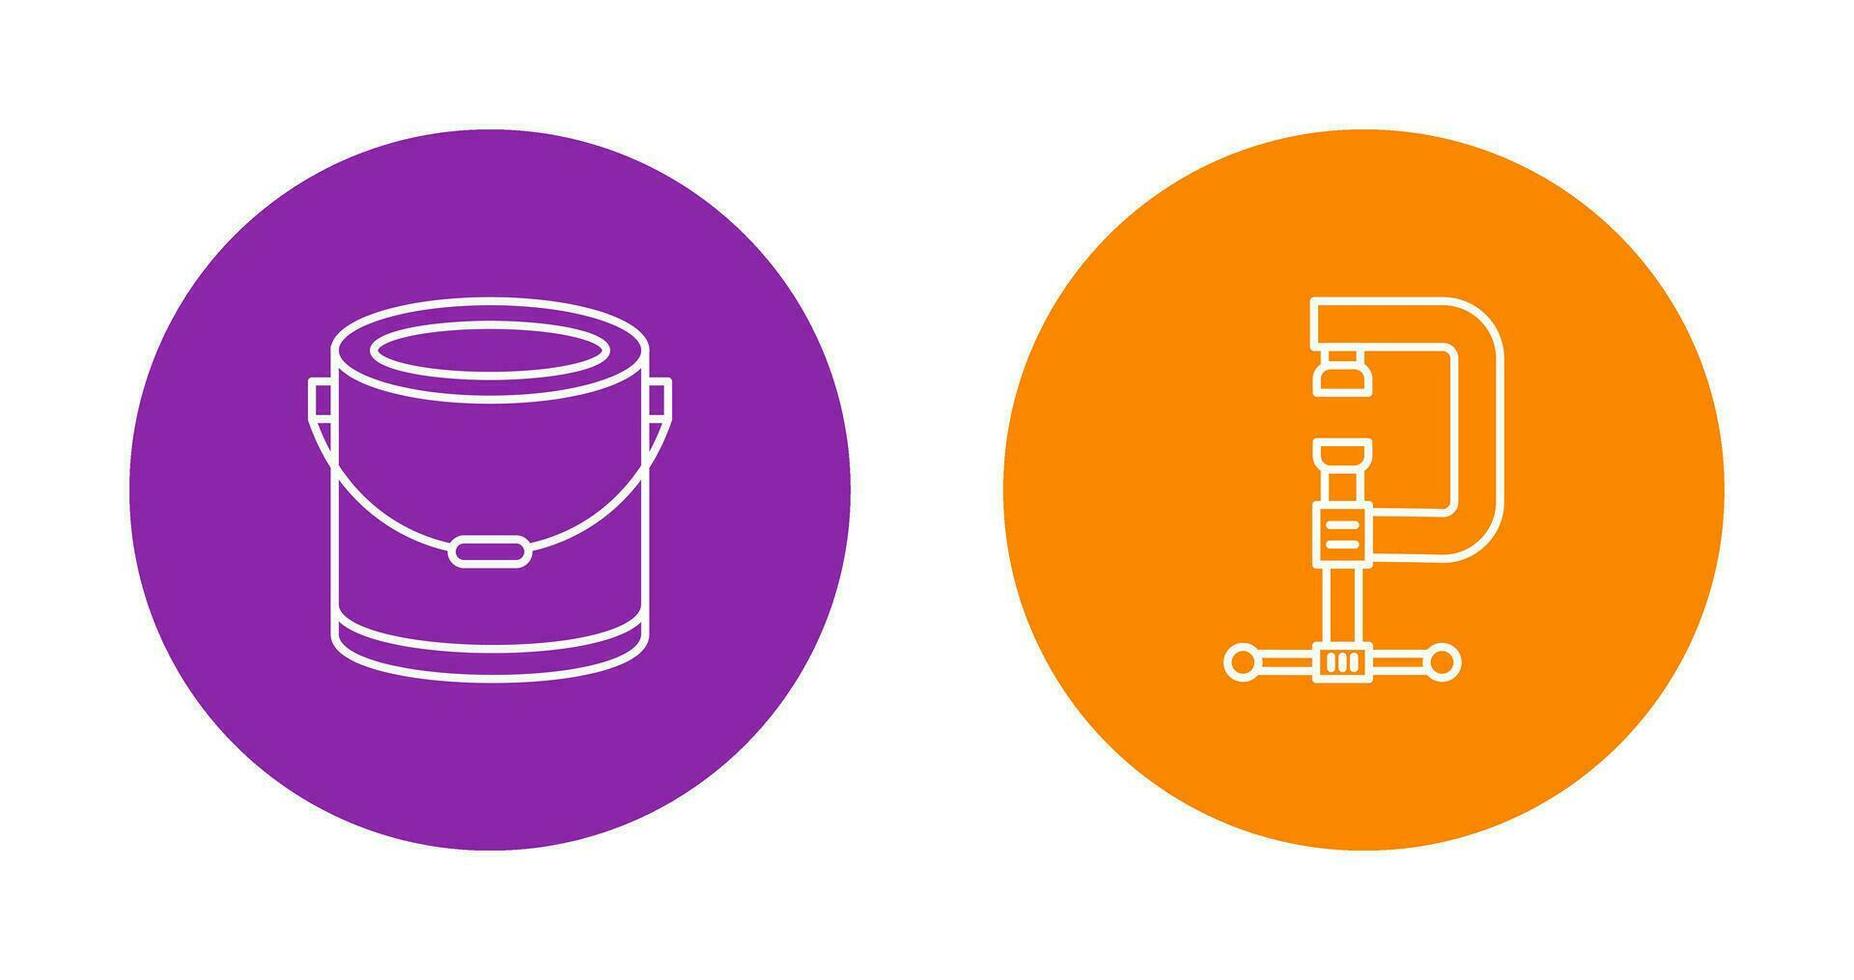 Paint Bucket and Clamp Icon vector